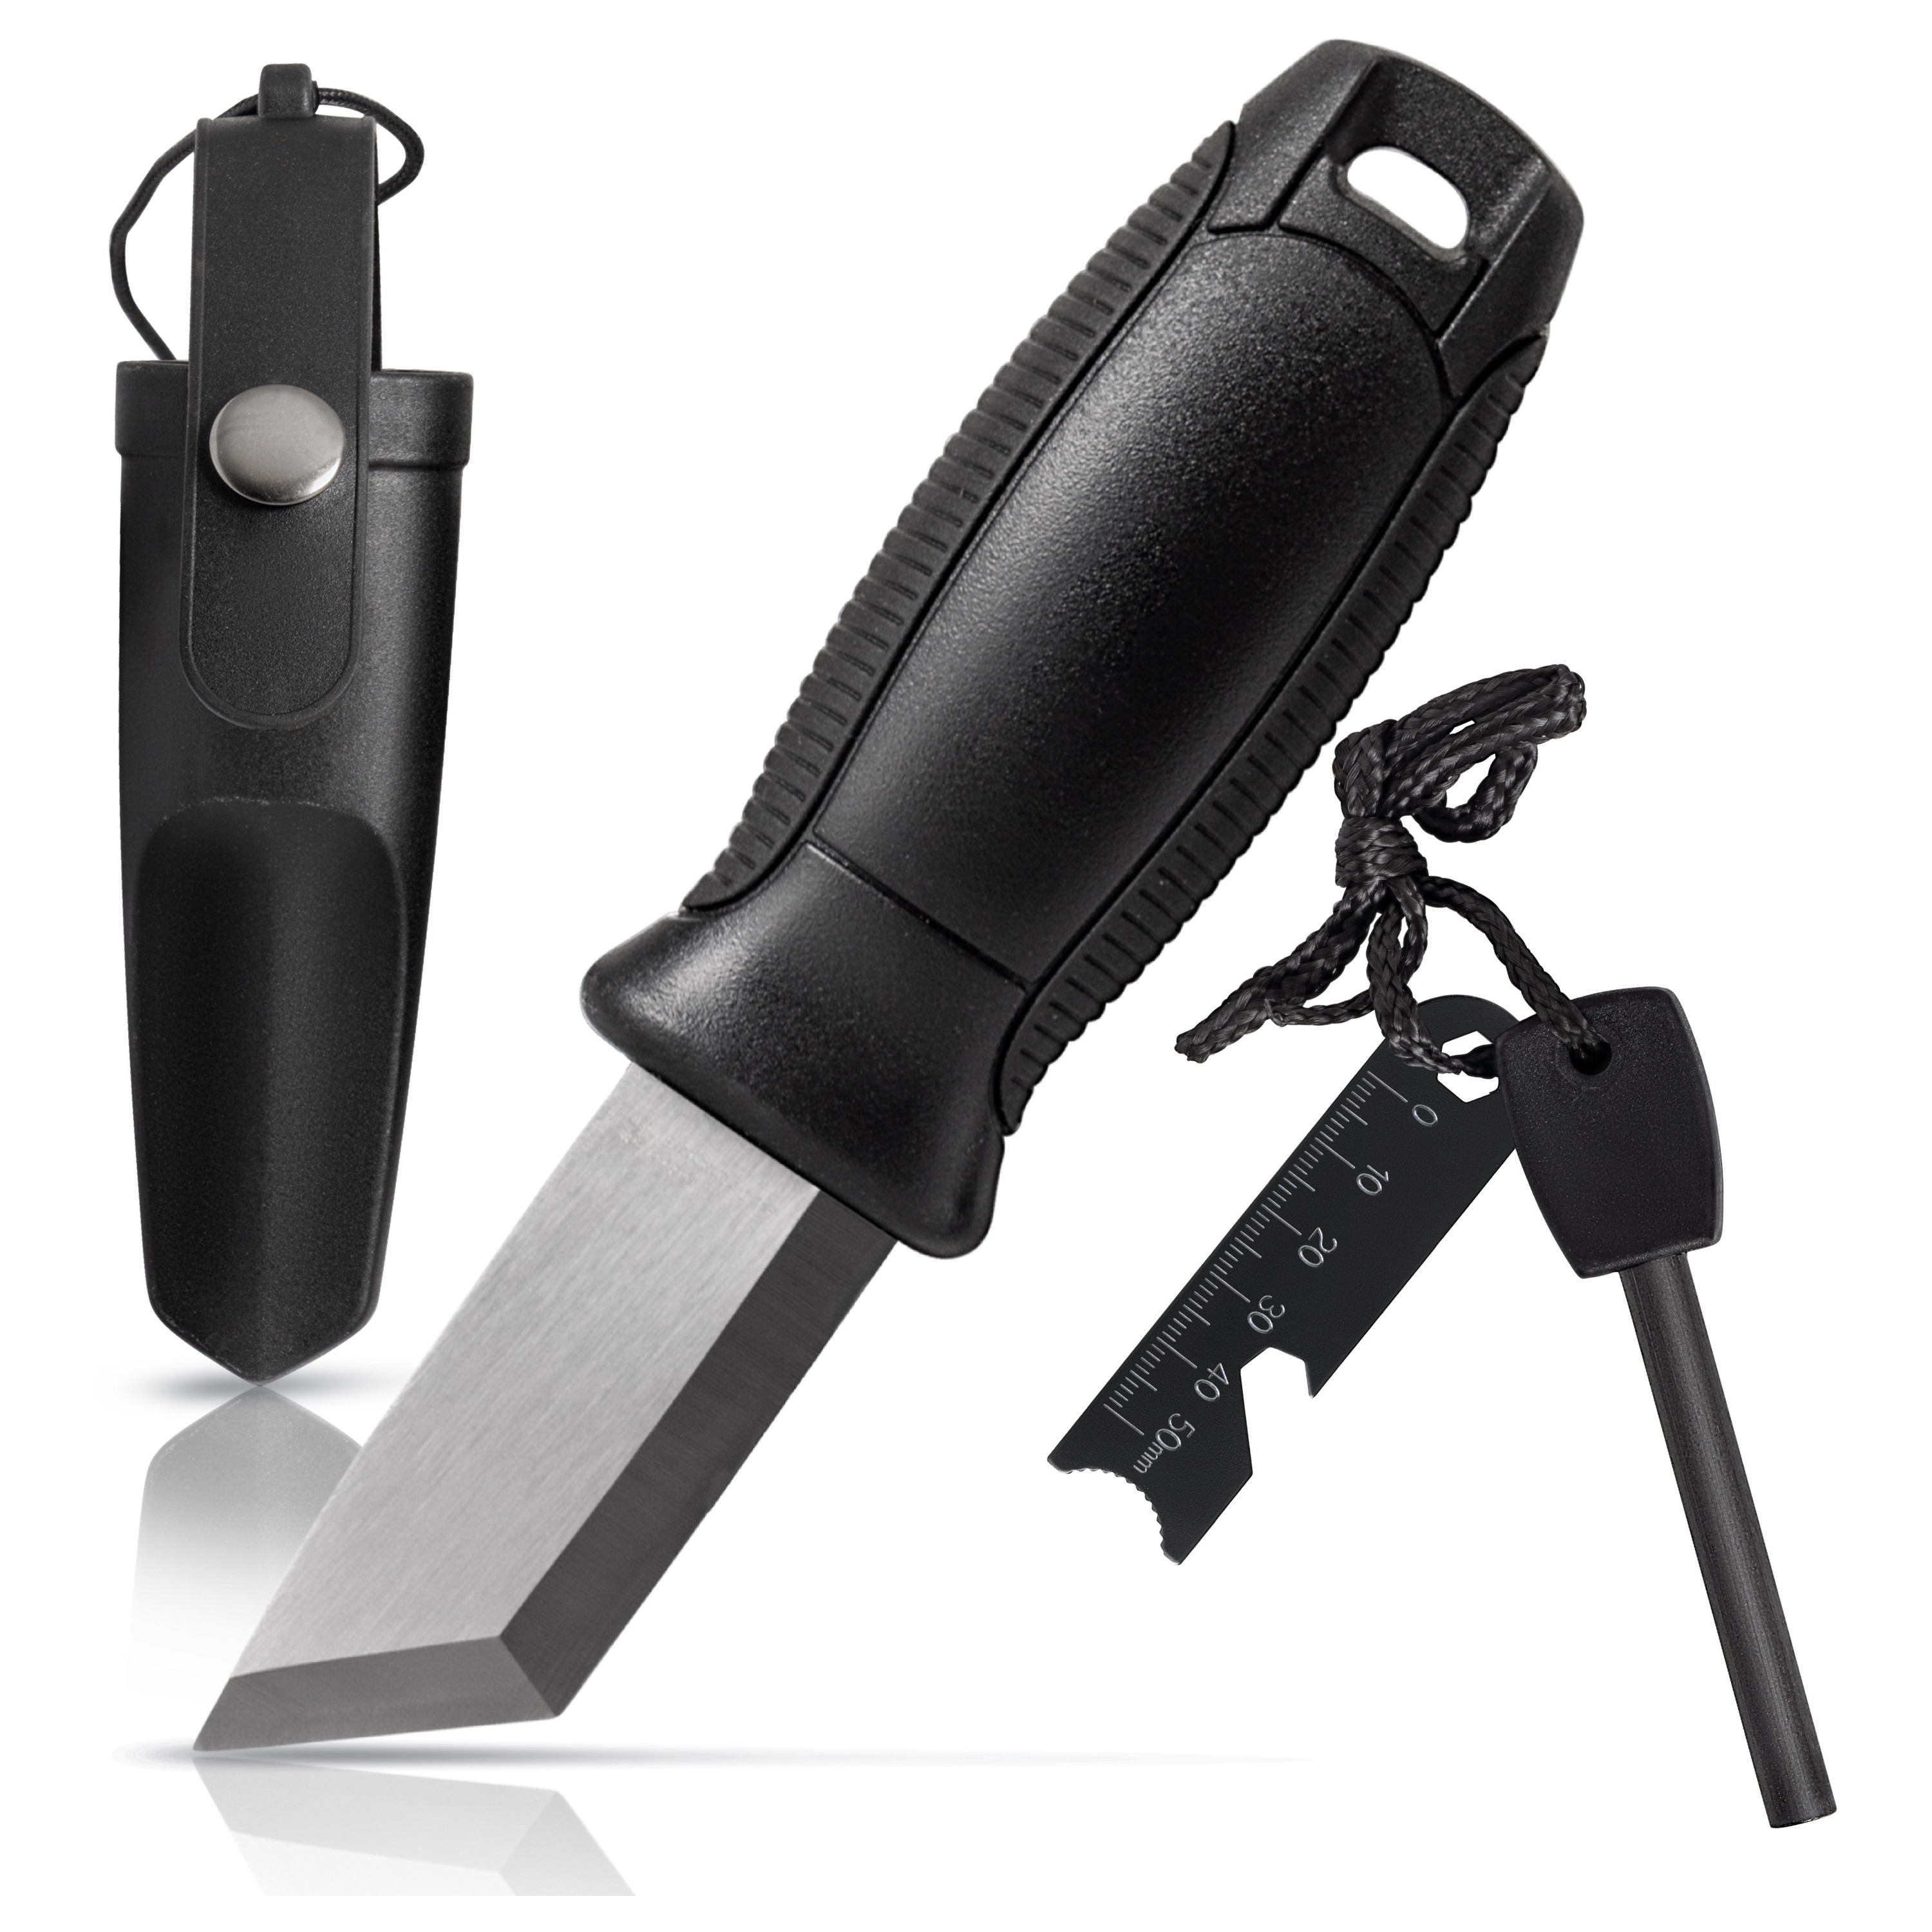 Stainless Steel Mini-Survival Knife with Fire Starter and Sheath